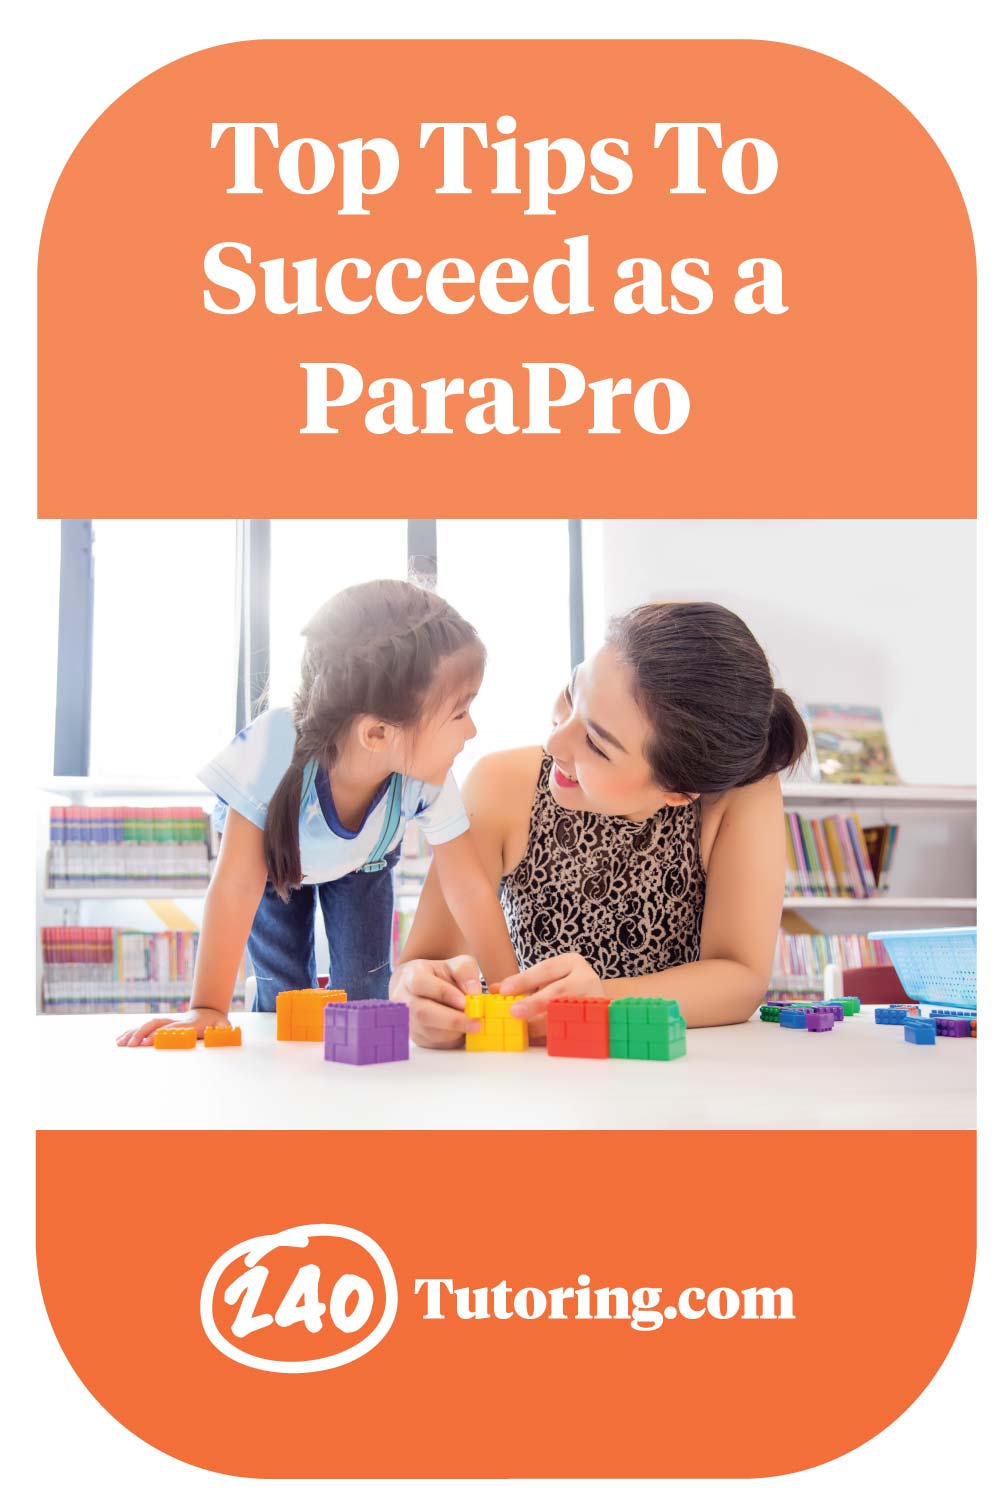 Top Tips To Succeed as a Paraprofessional